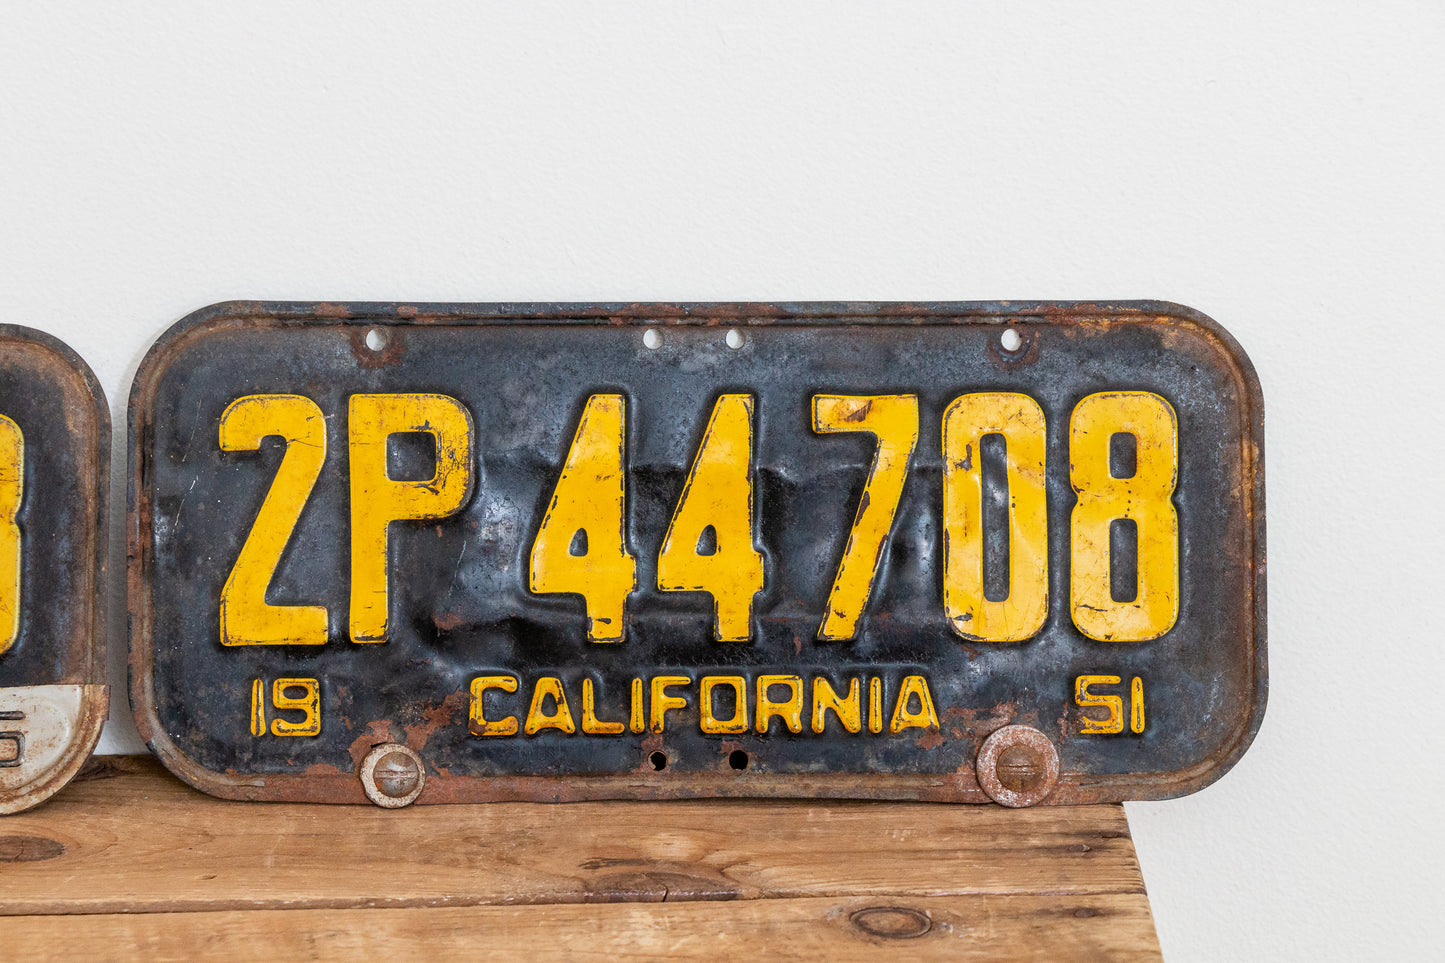 California 1951 License Plate Pair Vintage Wall Hanging Decor - Eagle's Eye Finds